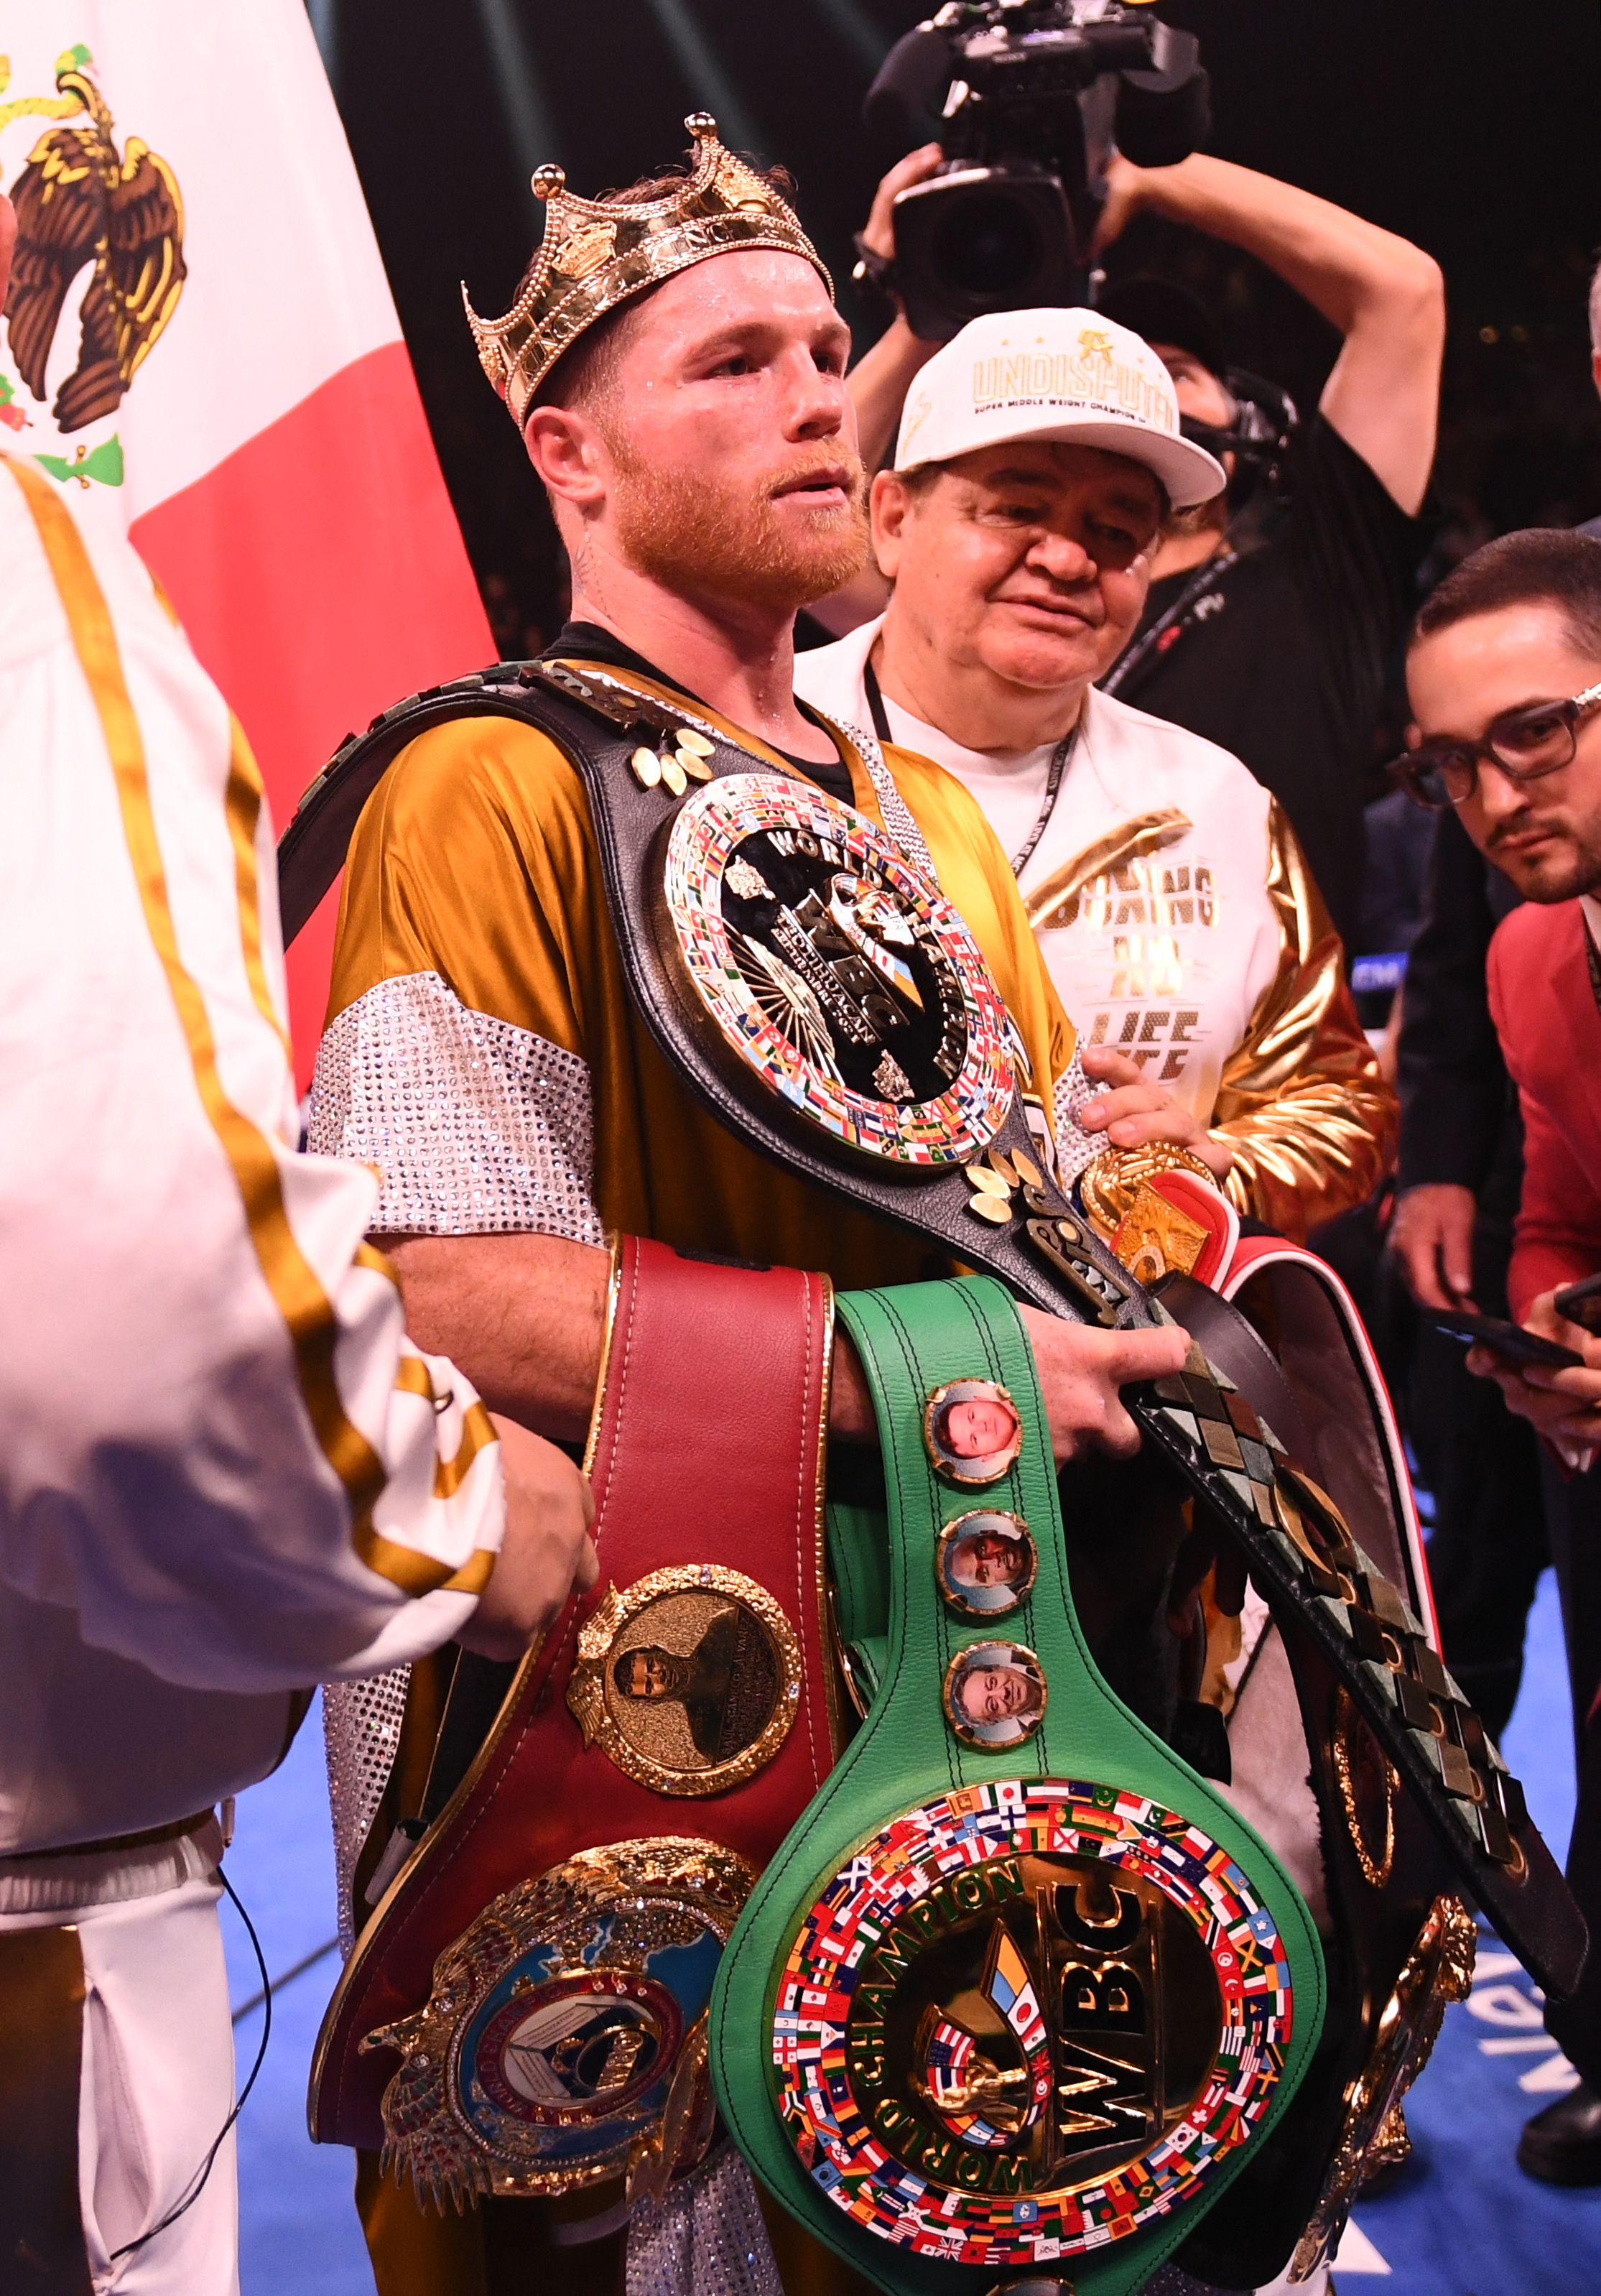 Canelo Alvarez is clearly the top man at 168, and still has his P4P case, too